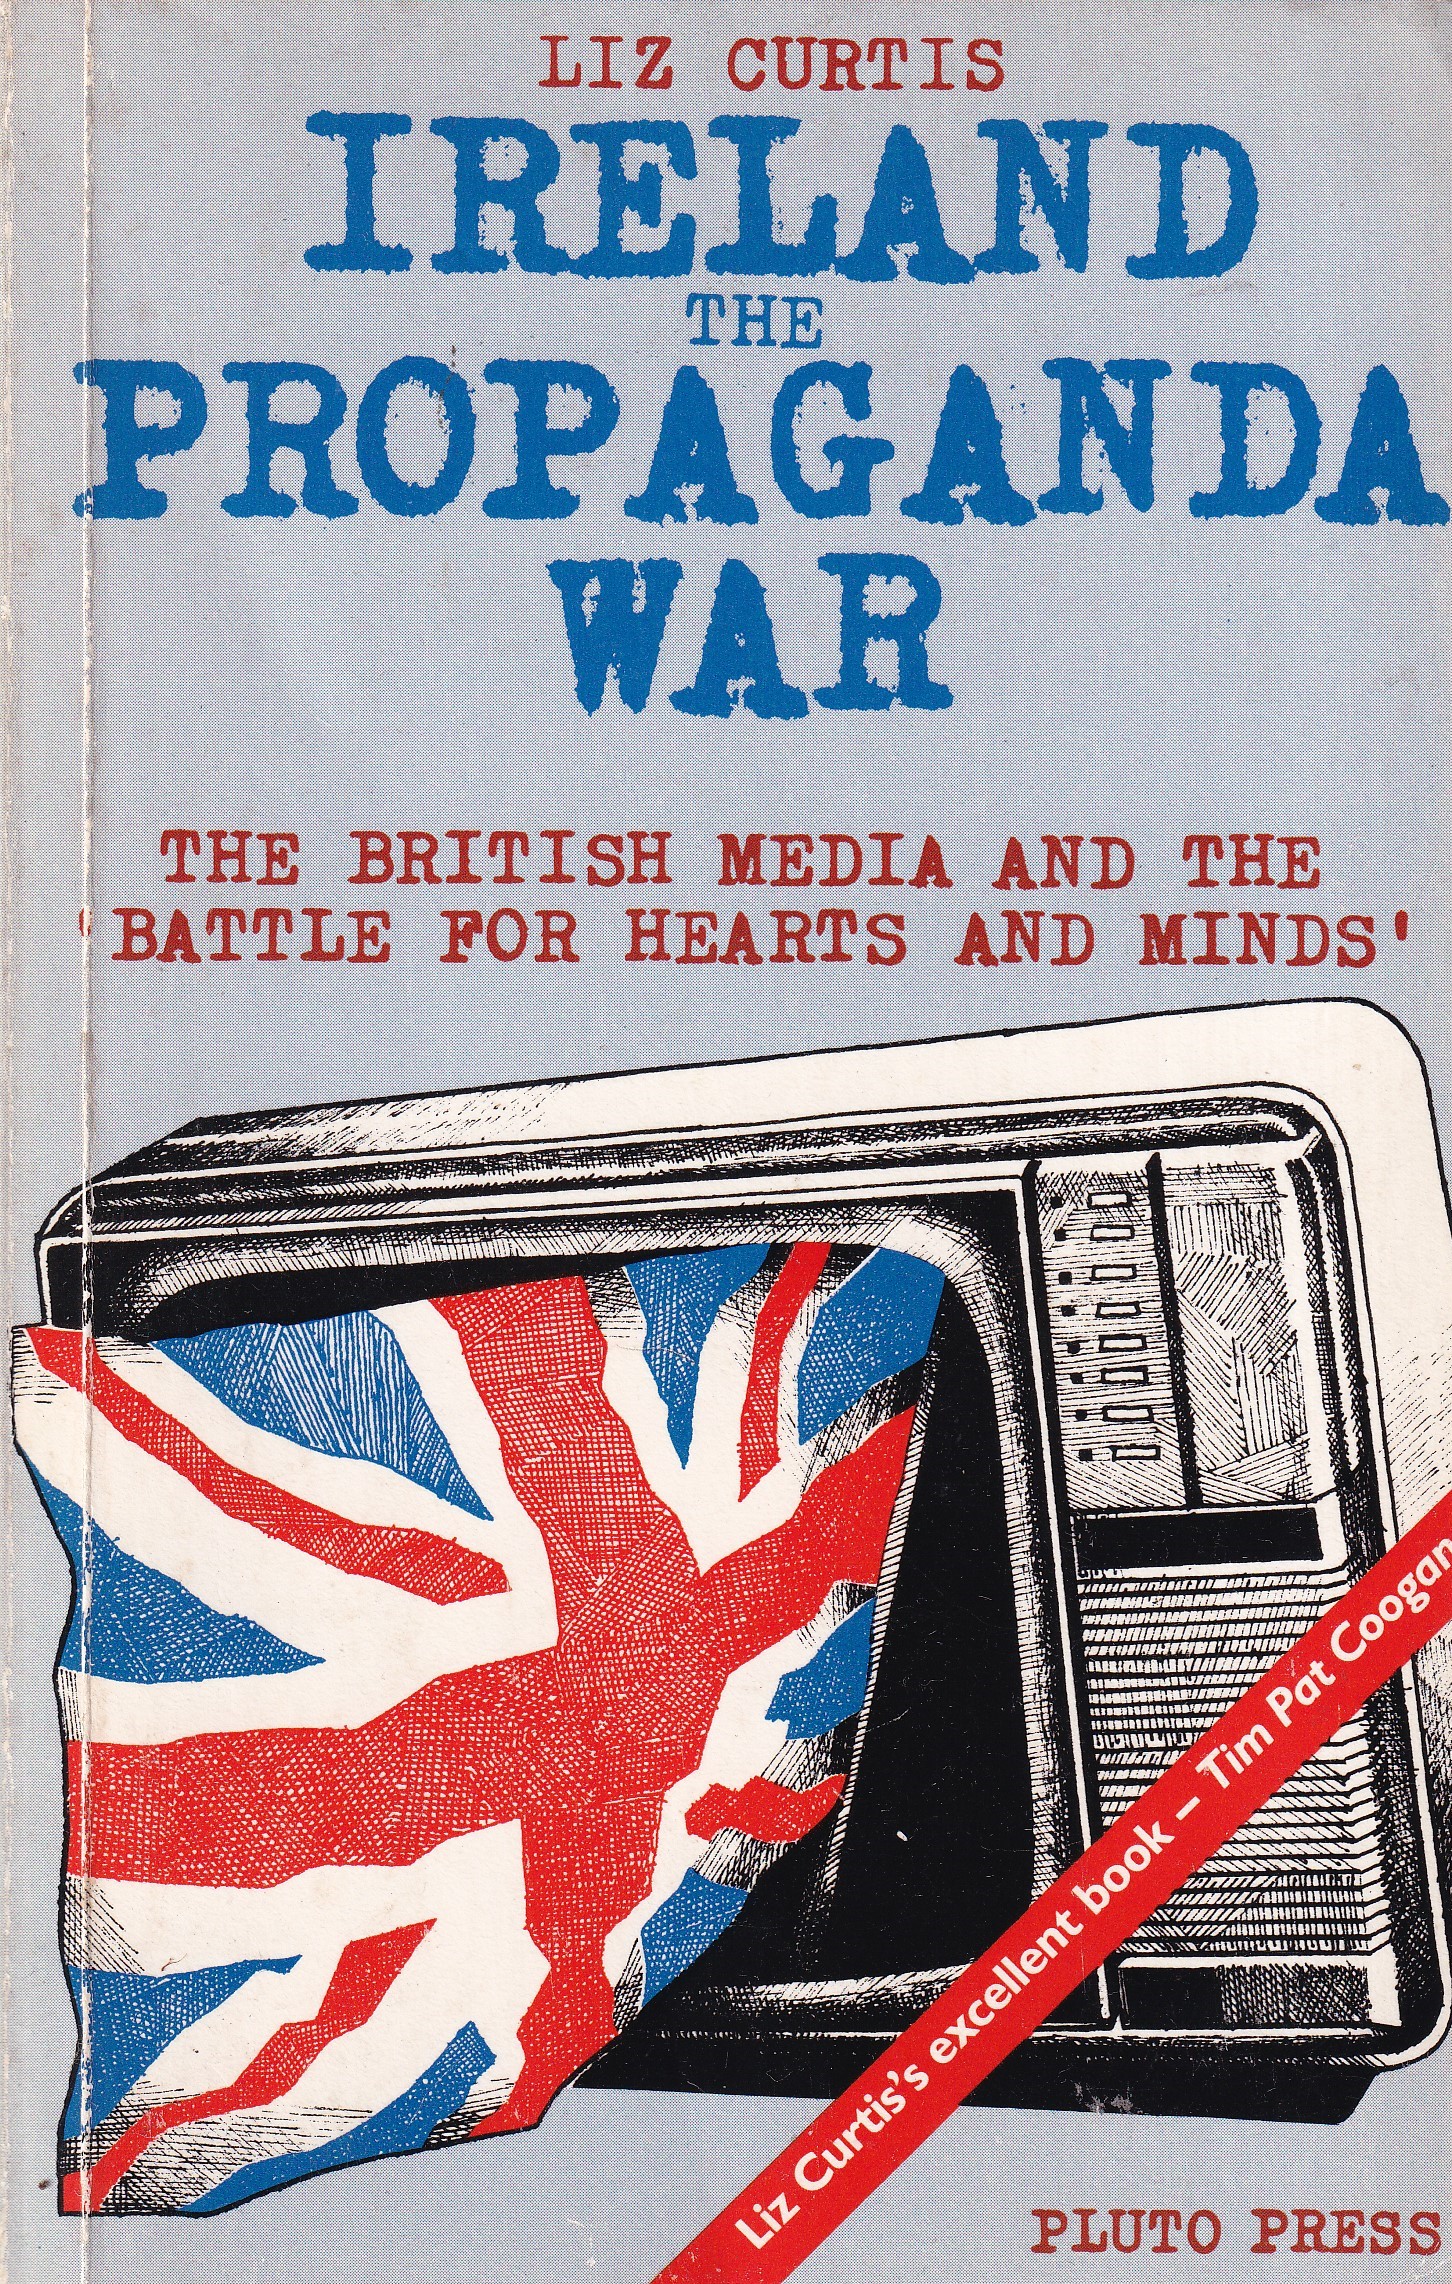 Ireland, The Propaganda War: The British Media and the ‘Battle for Hearts and Minds’ by Liz Curtis